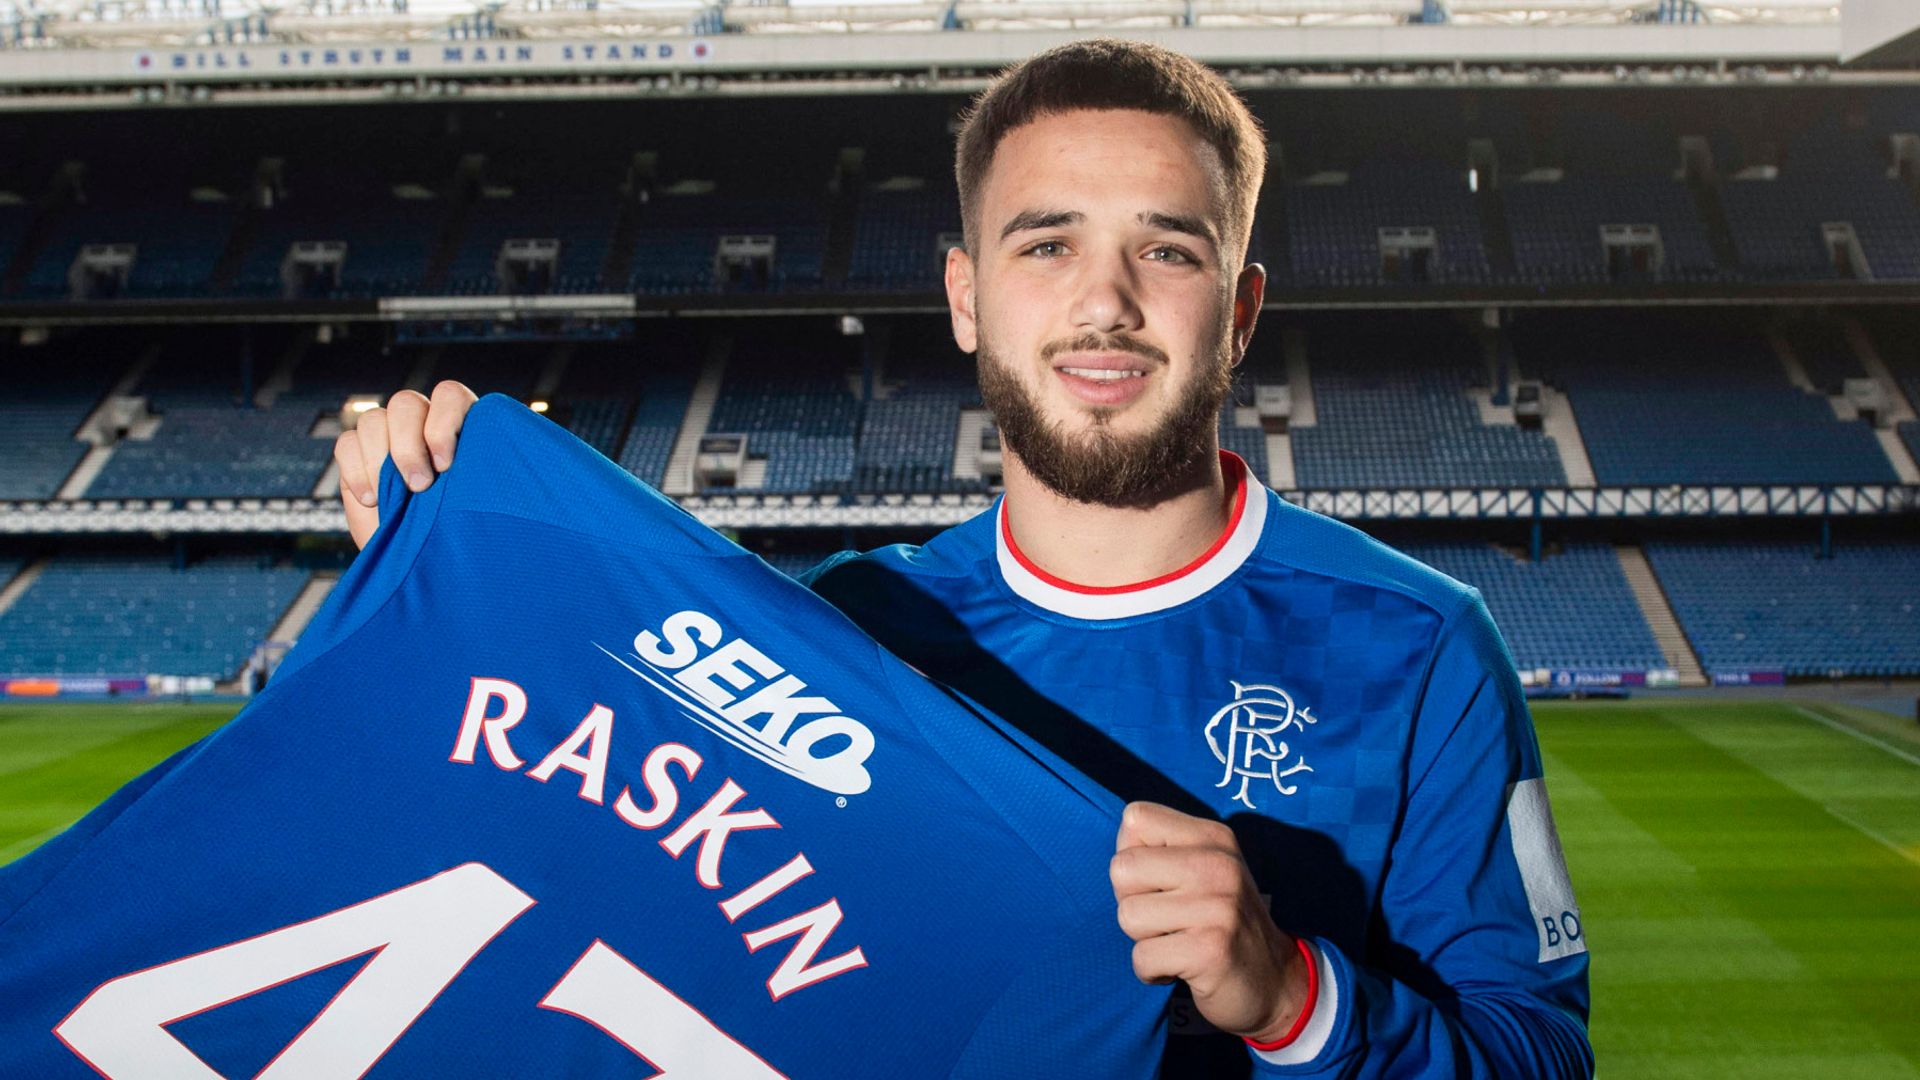 Raskin: Rangers is the right club for me